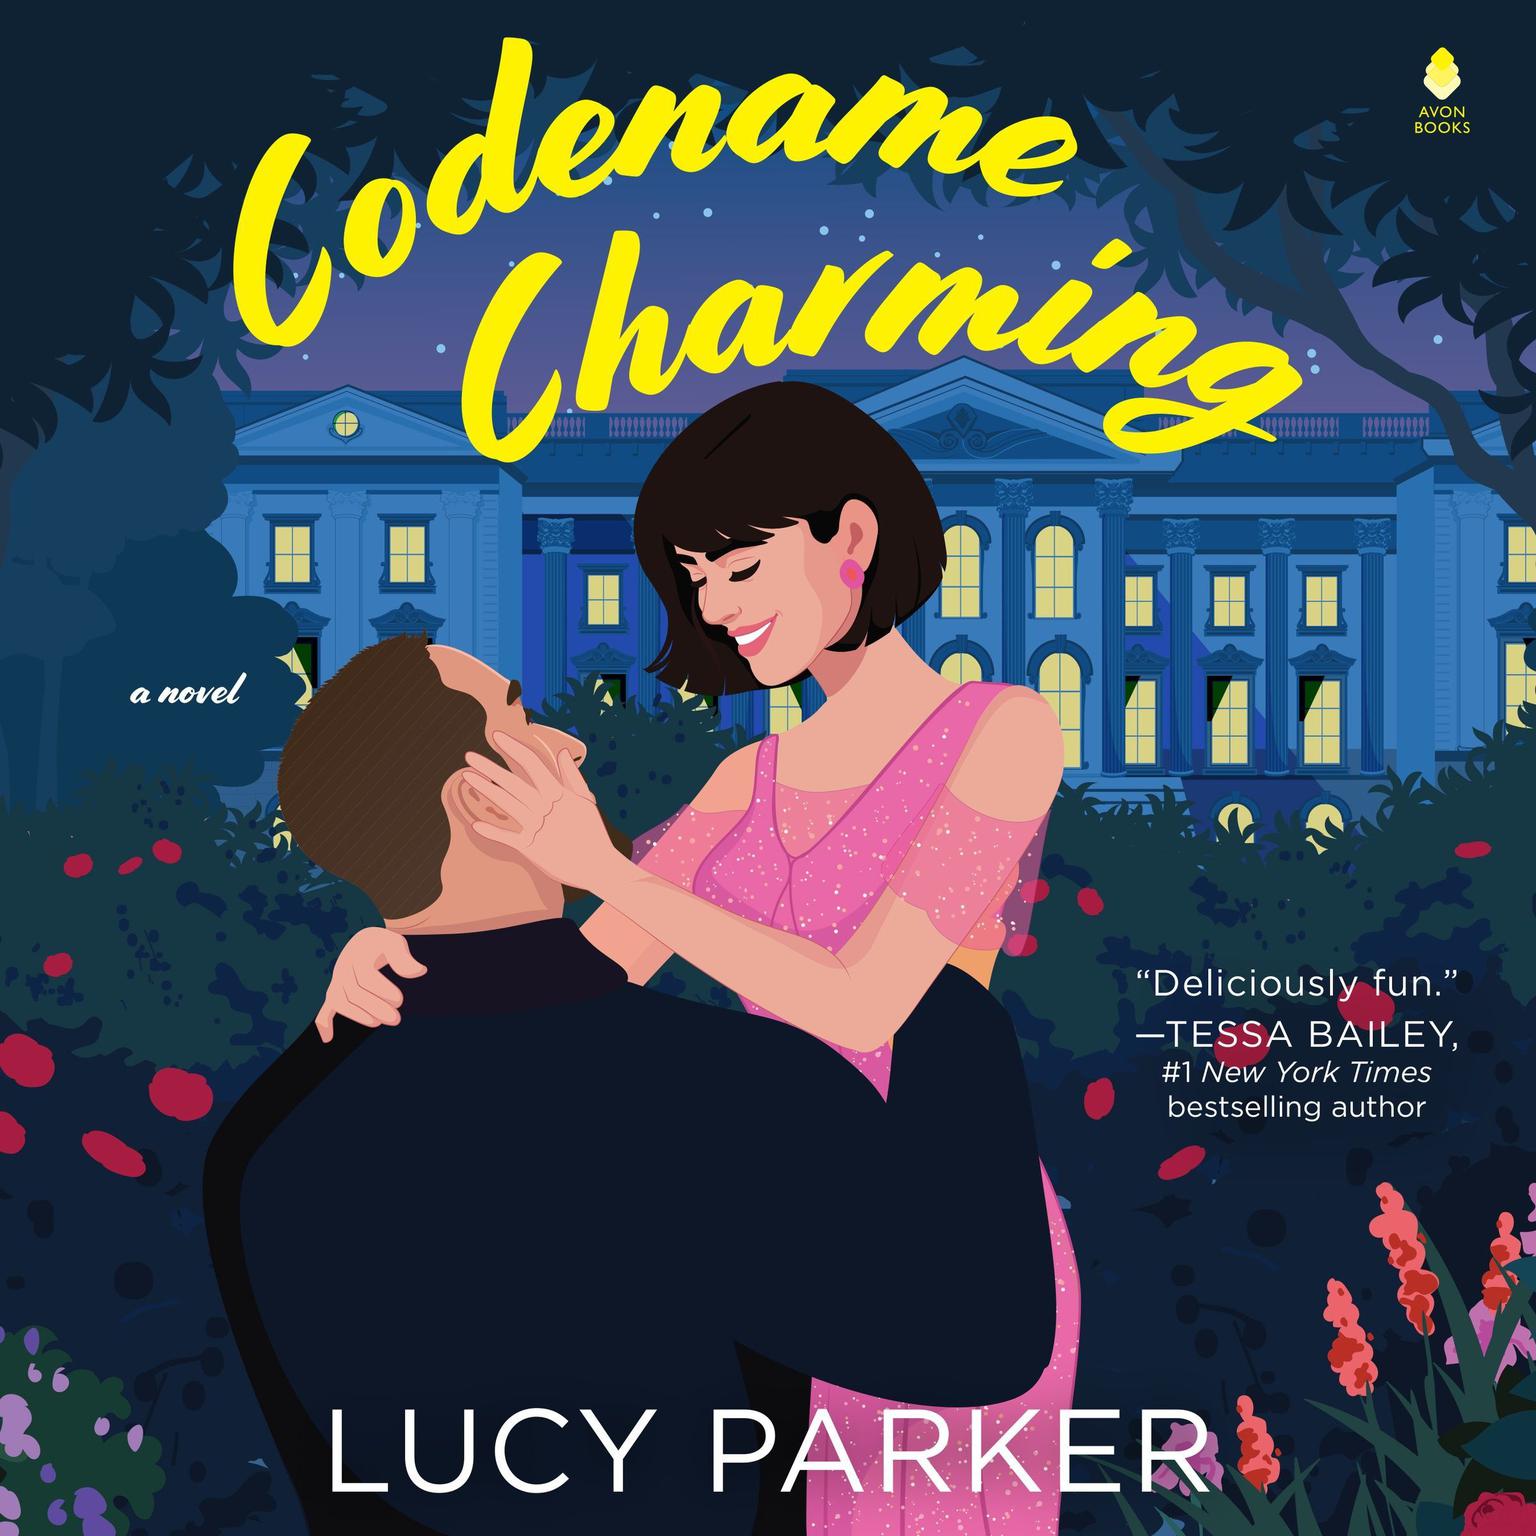 Codename Charming: A Novel Audiobook, by Lucy Parker